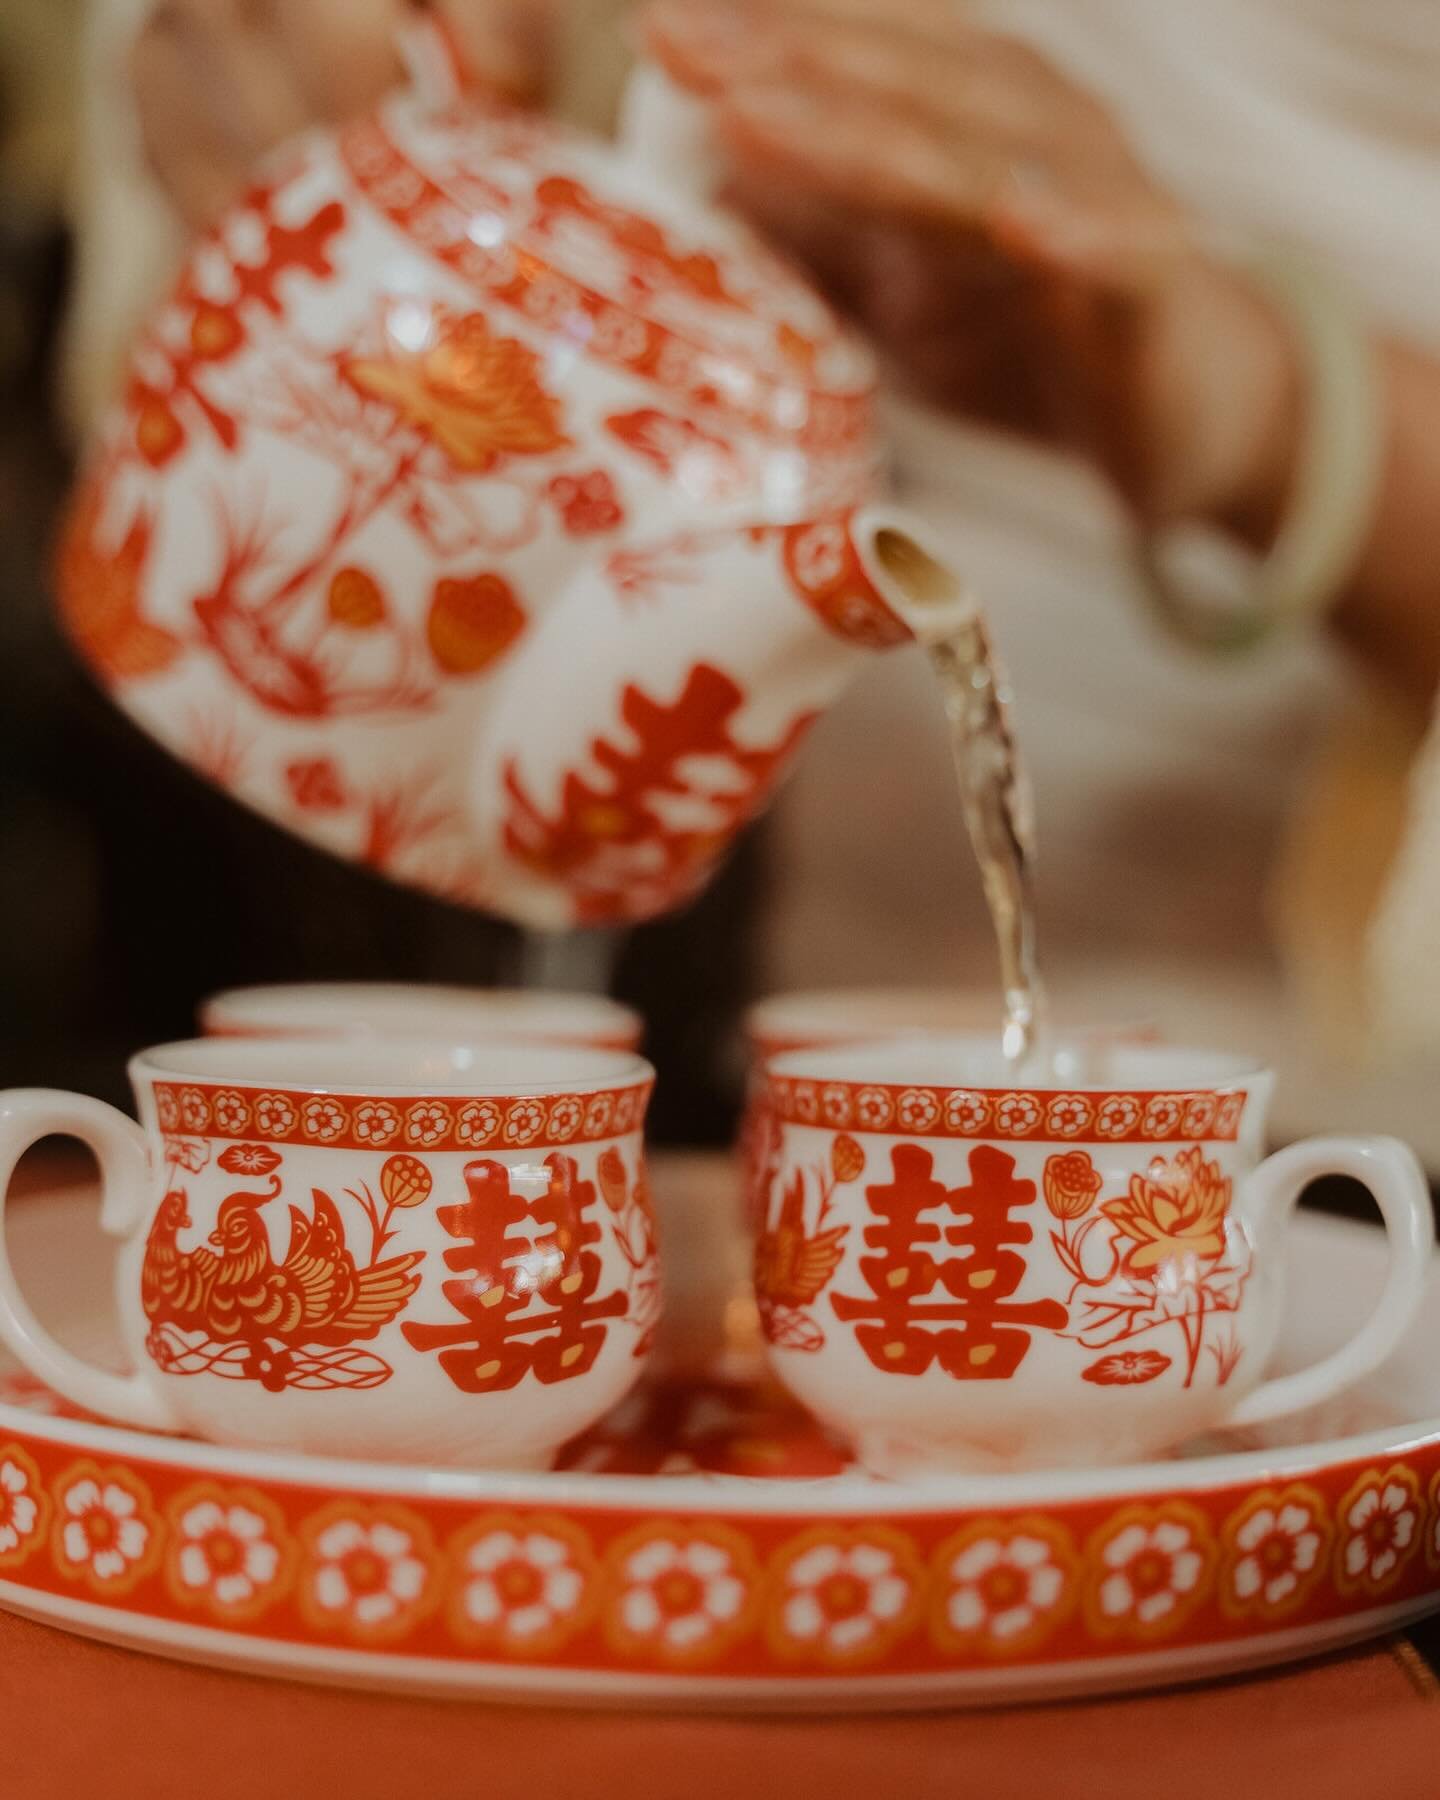 ✨TEA CEREMONY✨

Tea ceremonies are the perfect opportunity to carve a time and space before the wedding ceremony to show gratitude and say thank you to parents and family who have been a significant part in shaping your lives. It can be the sweetest 